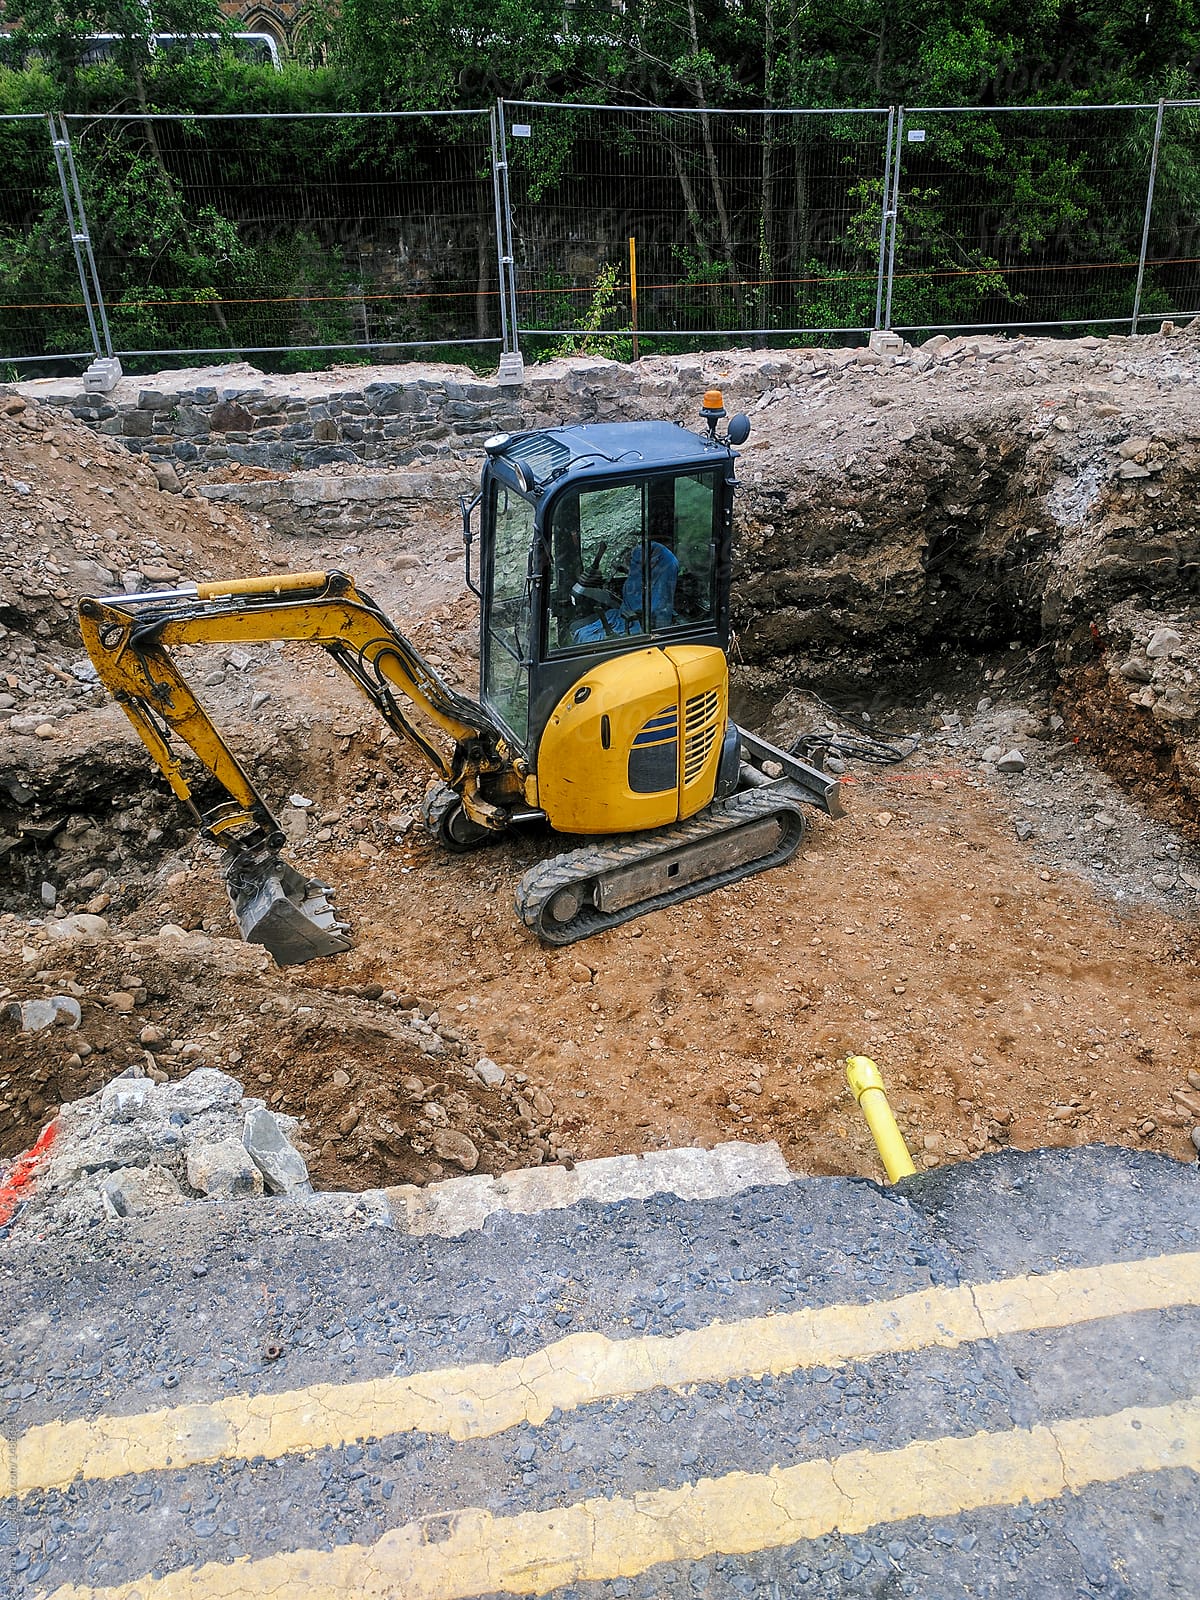 Mini excavator clearing ground on a building site for concrete foundations.